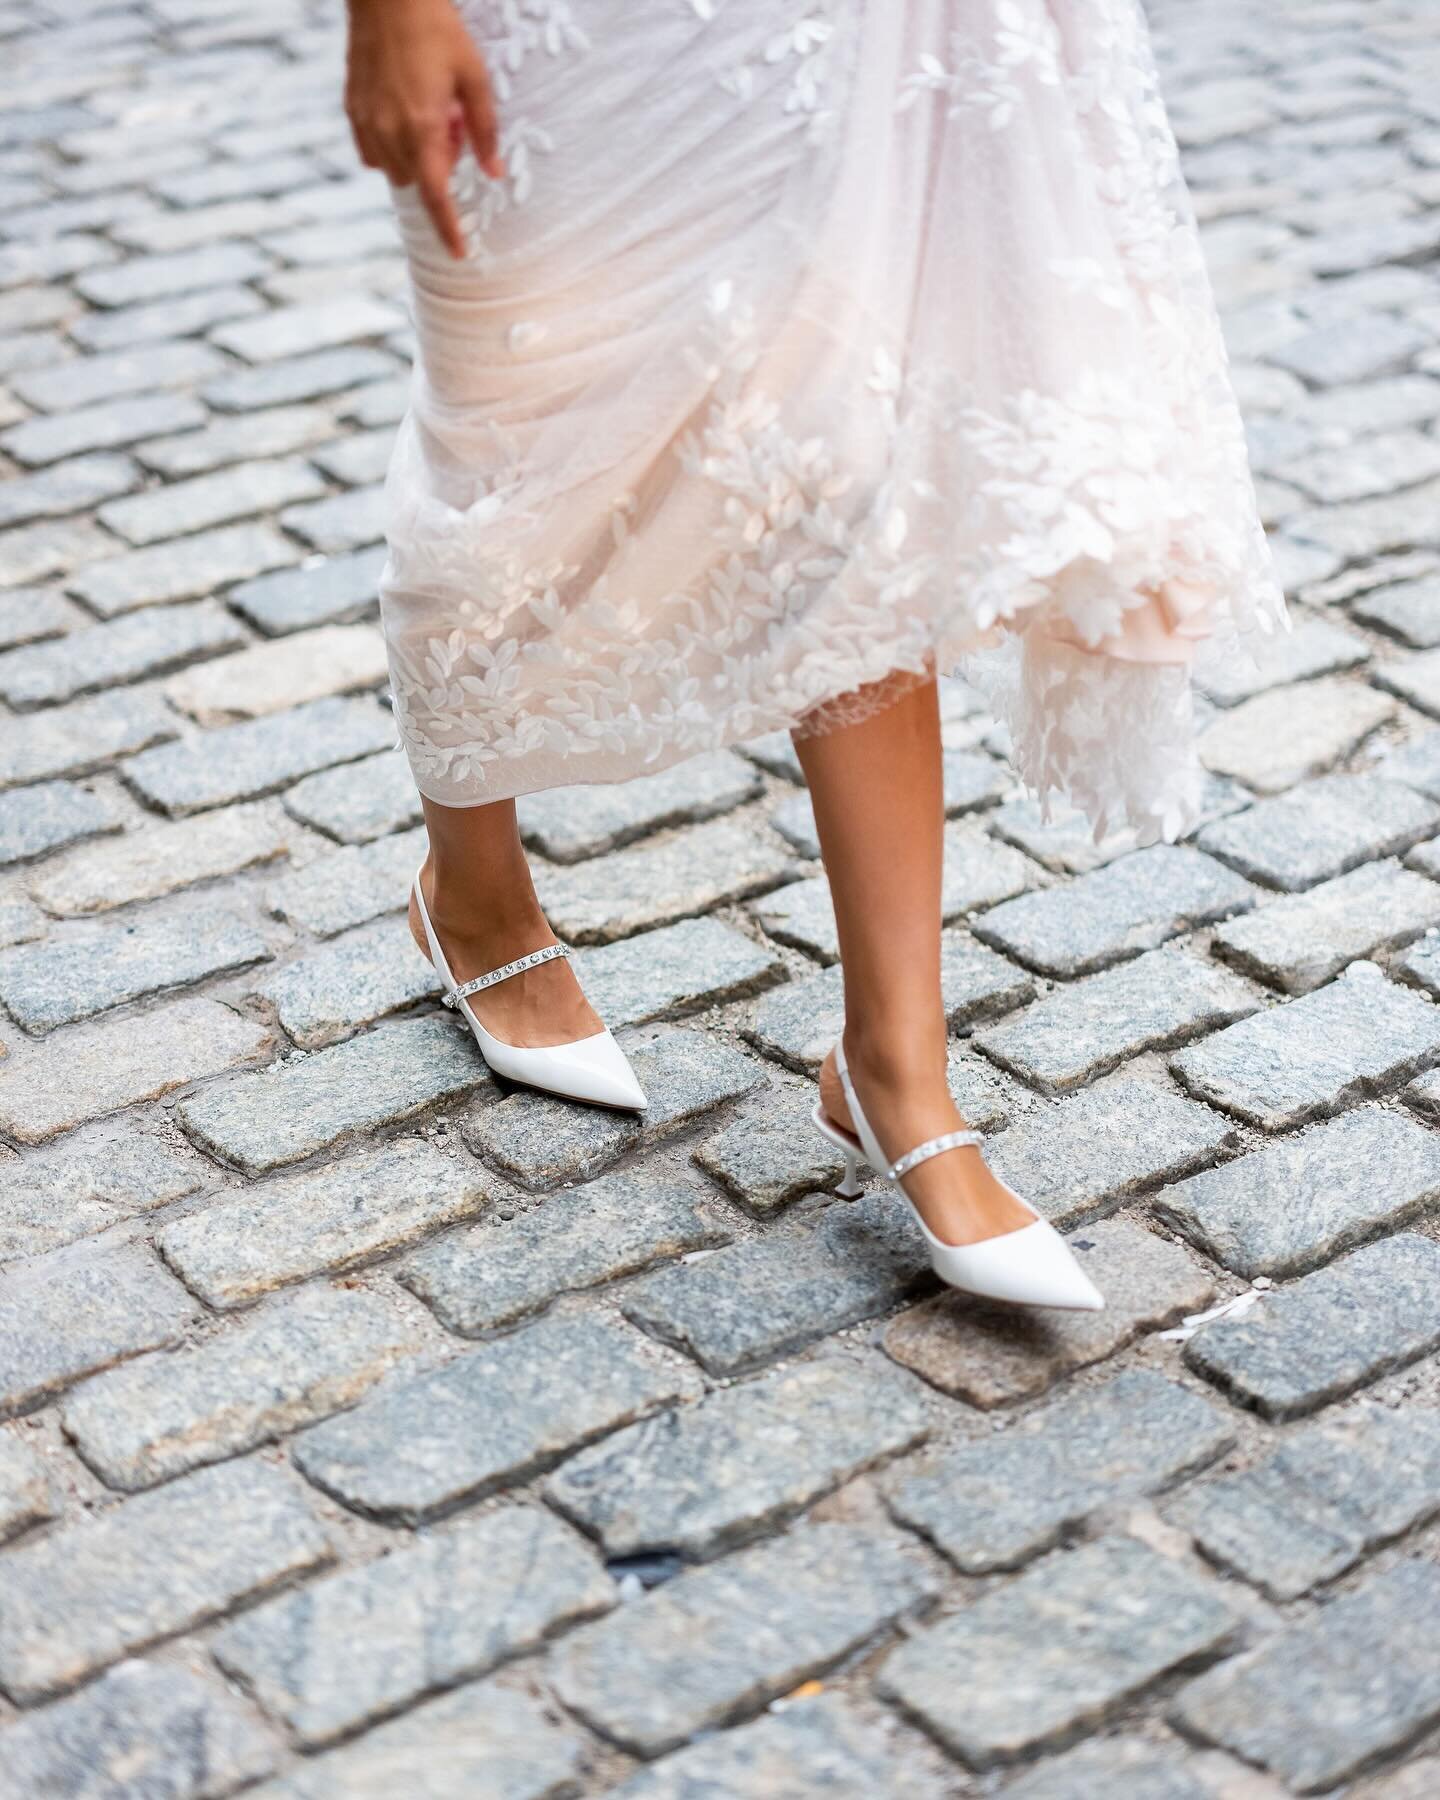 Alisha on the way to her first look&hellip;.@miumiu heels 🤝🏼 TriBeCa cobblestones! I may or may not have cut this train off before the first dance&hellip;.👀✂️ 

Photo: @roeyyohaistudios 
Planning, production and florals: @fete.ny 
Stylist: @maisie